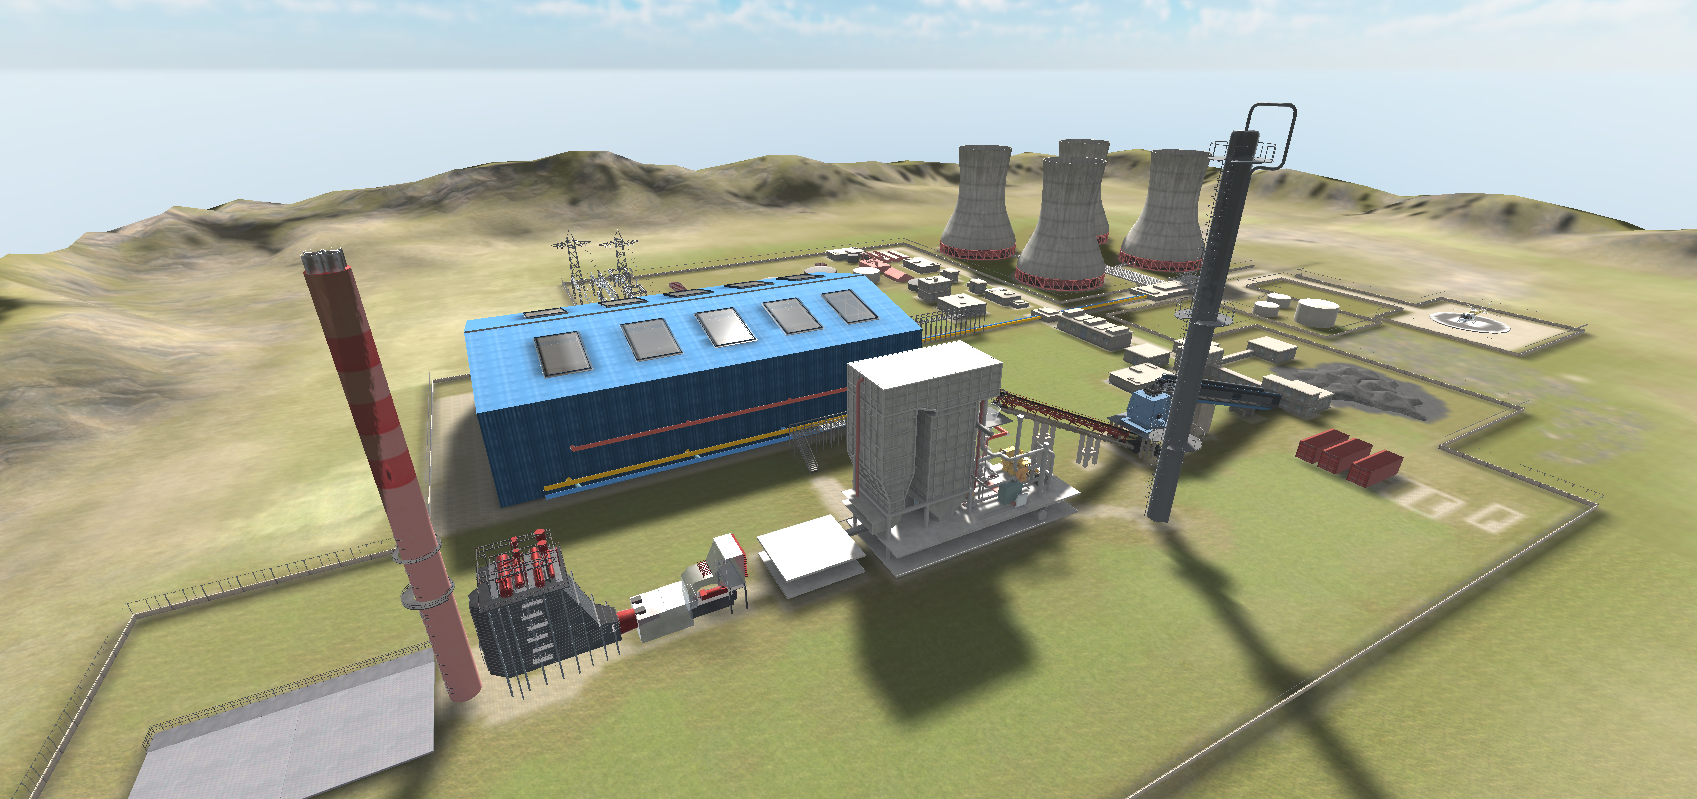 Thermal Power Plants